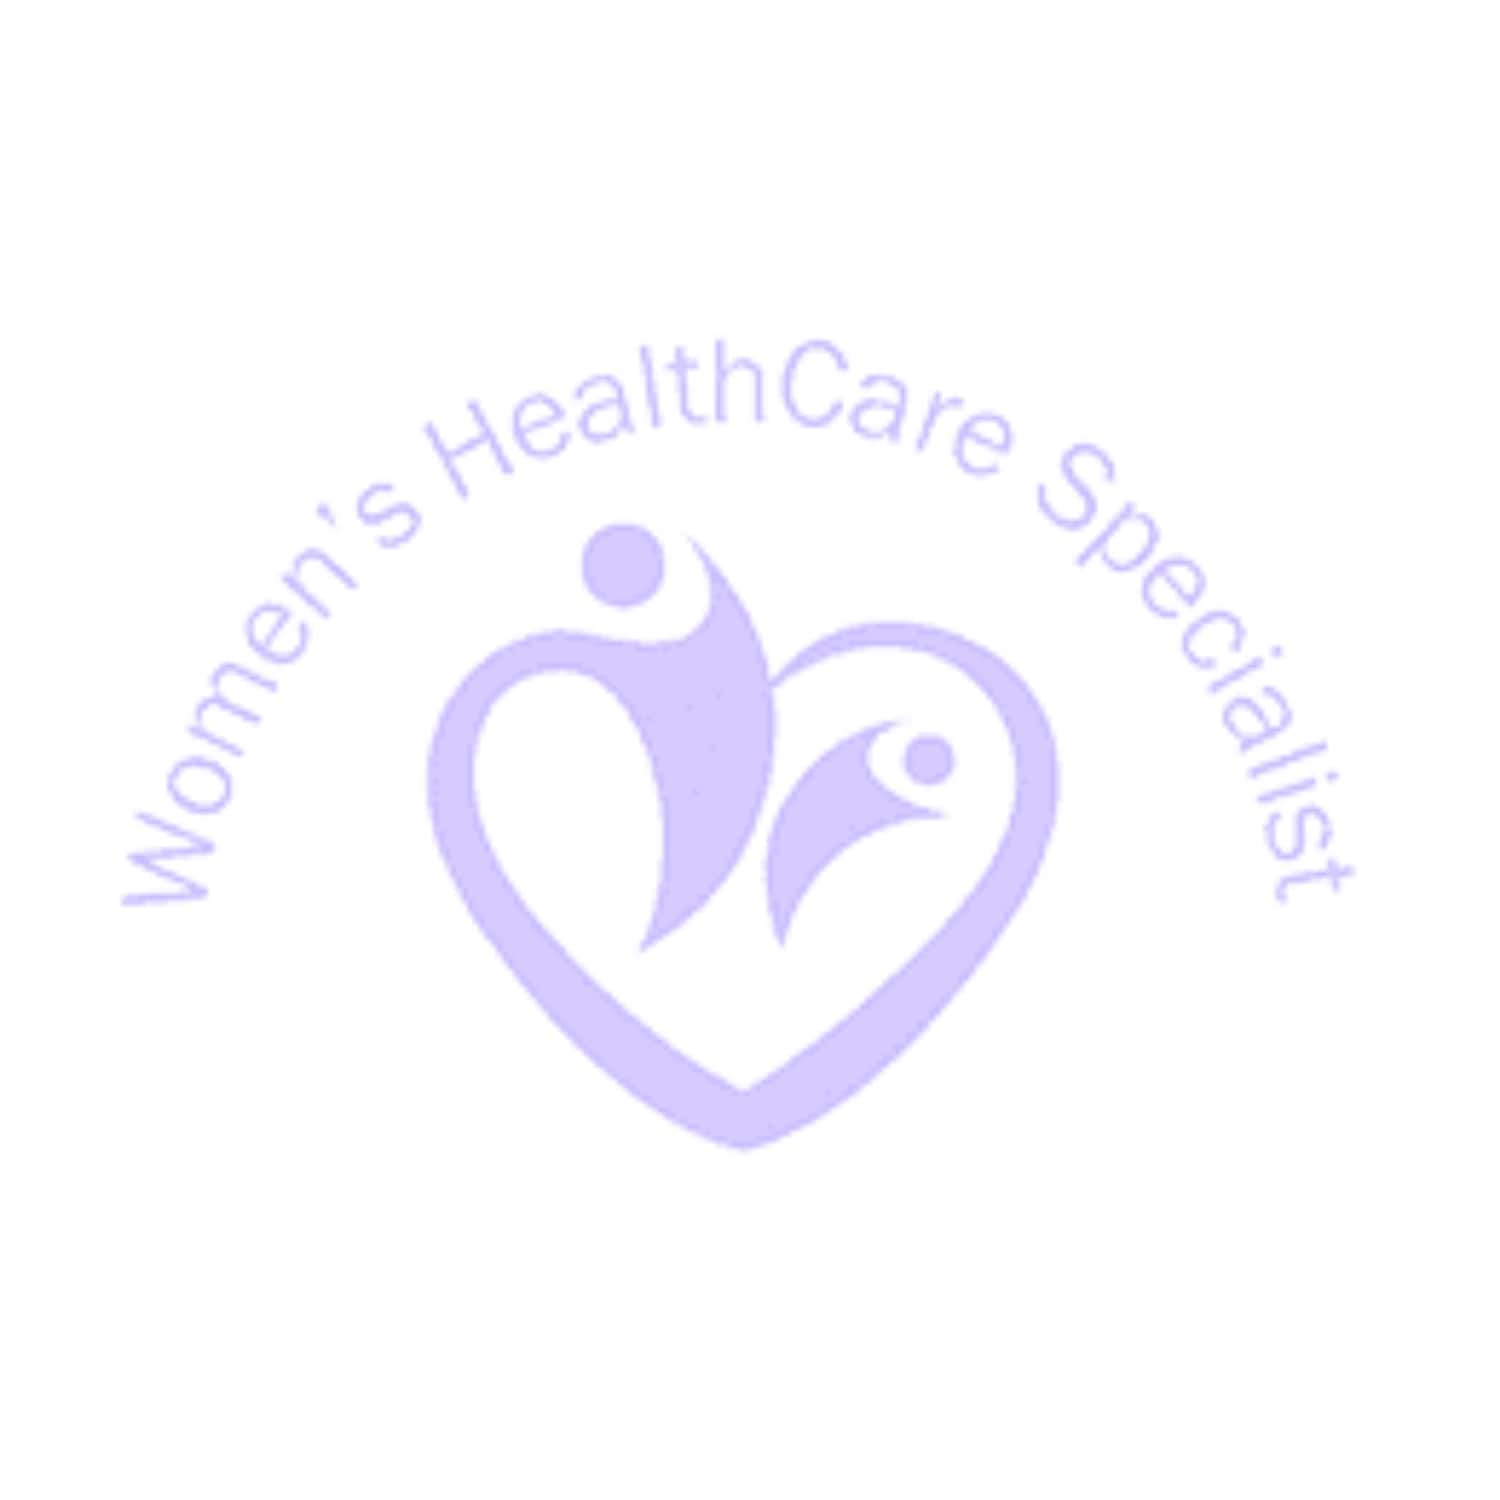 Women's Health Care Specialists